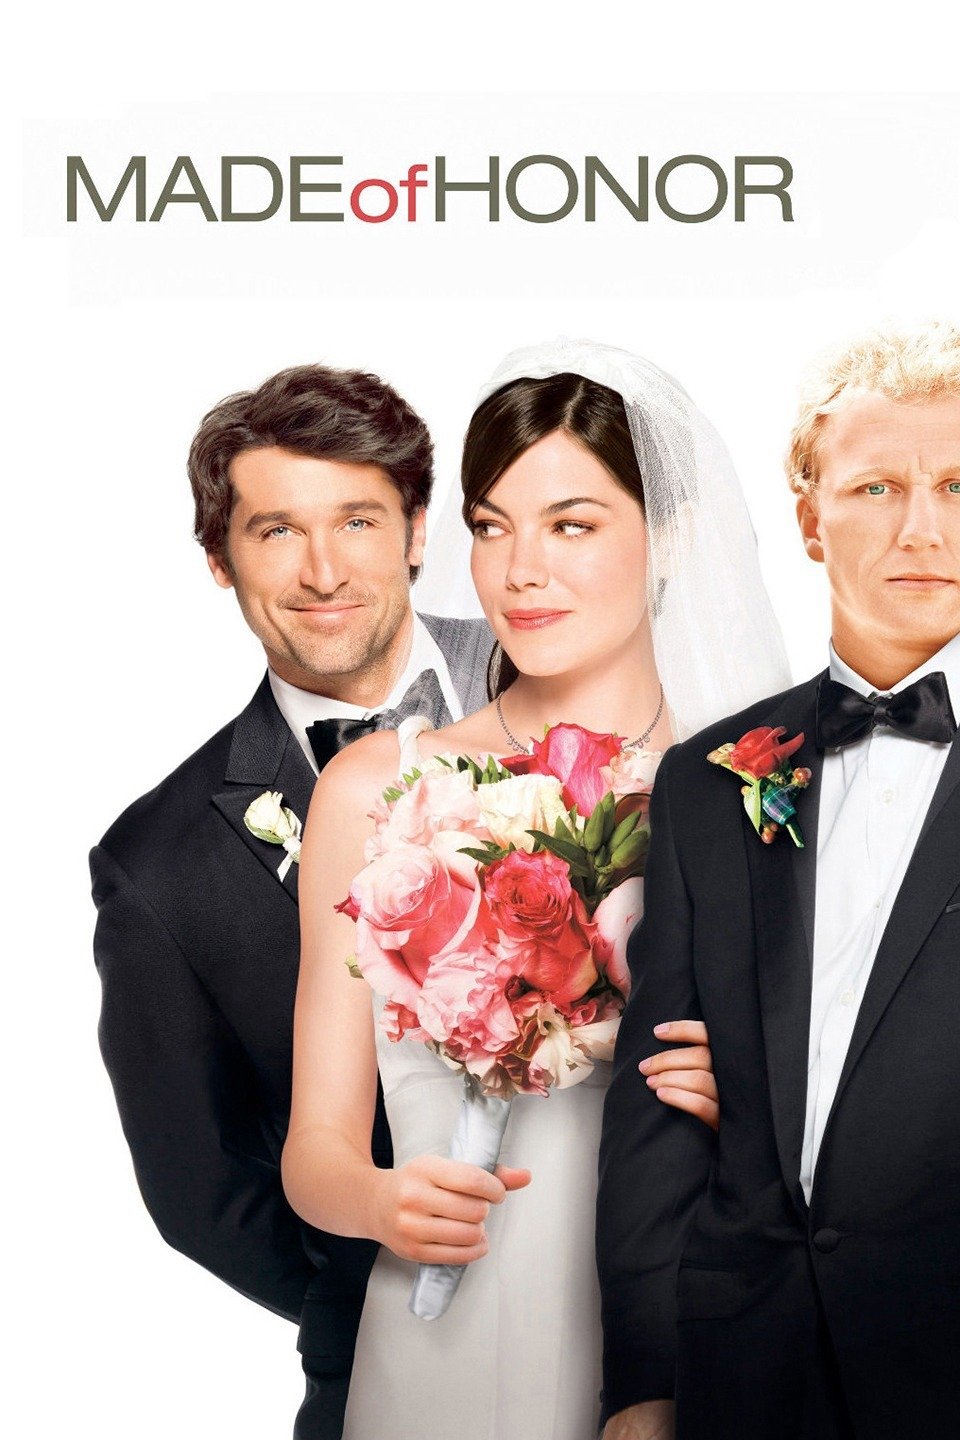 Made of Honor, 2008 